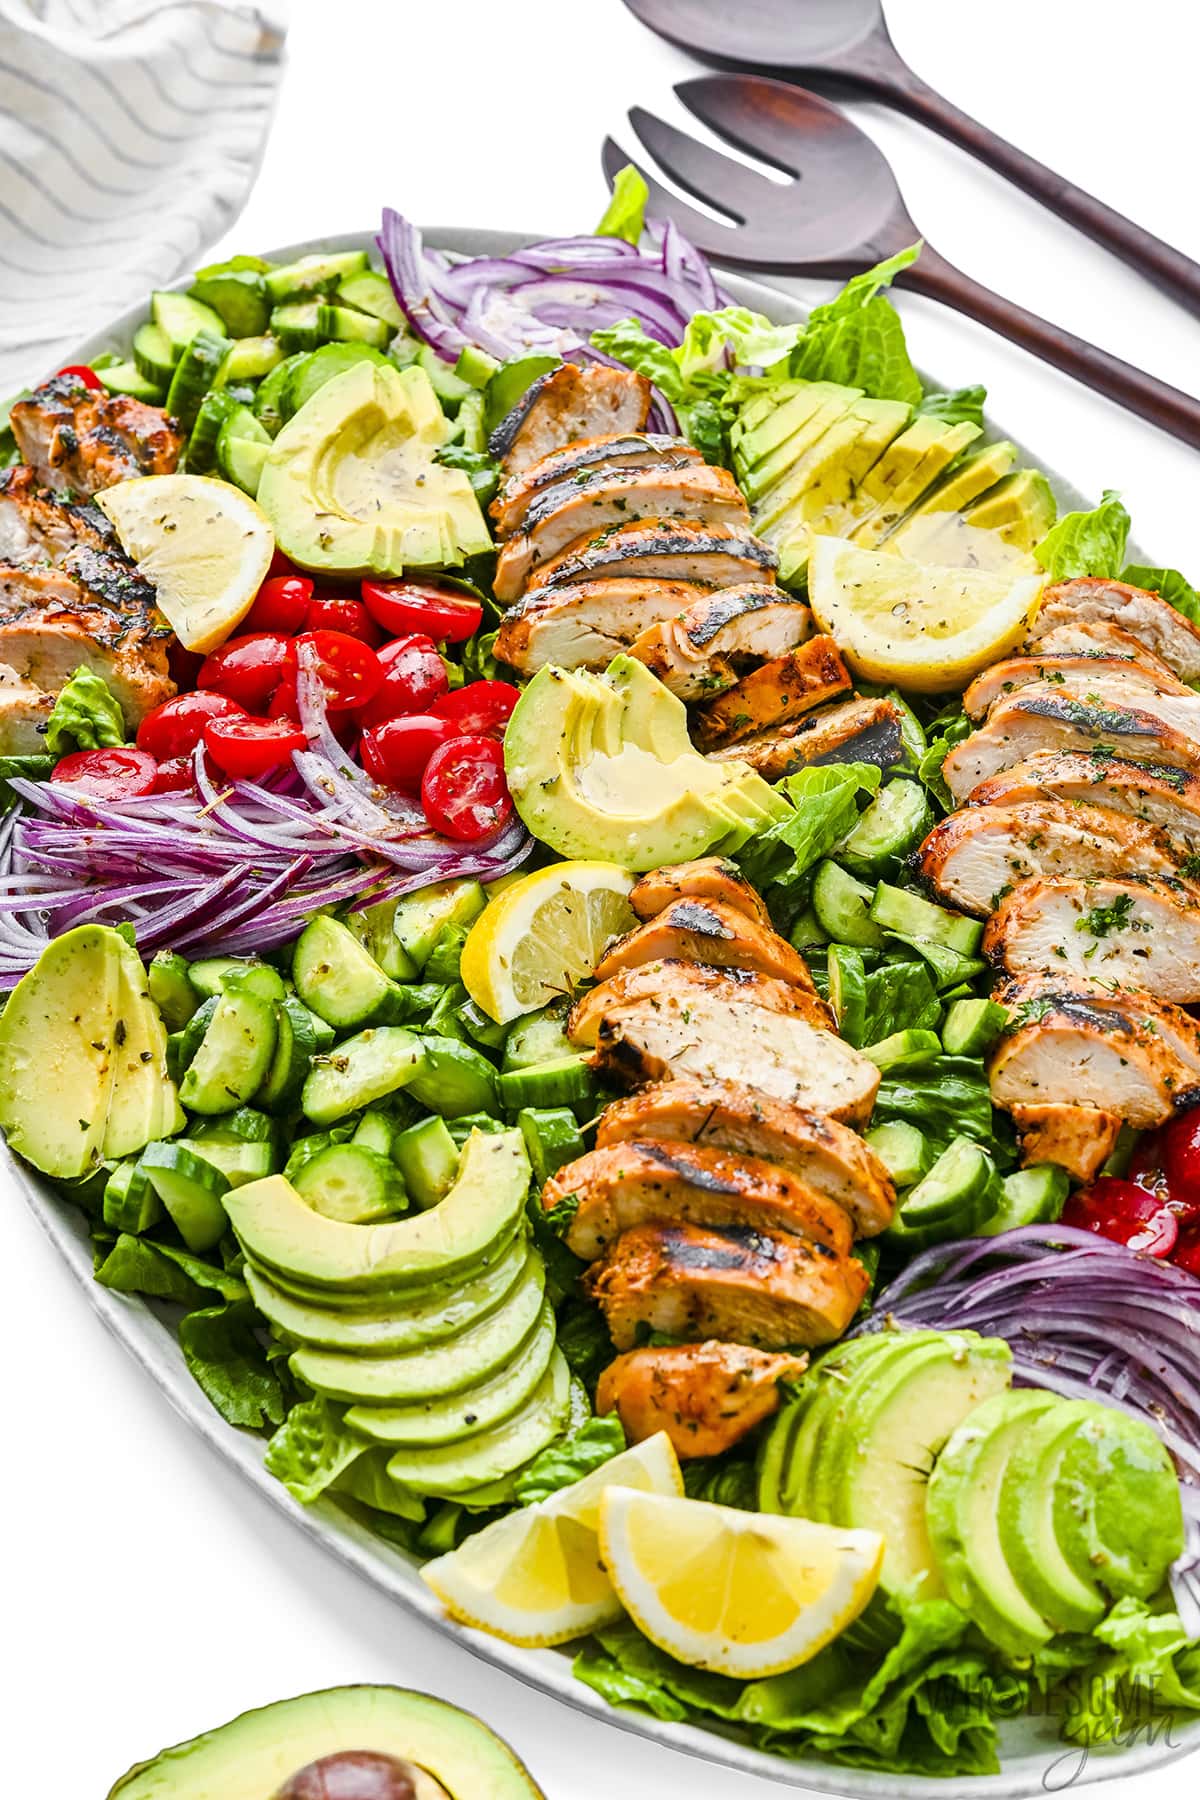 Grilled chicken salad recipe on a platter.